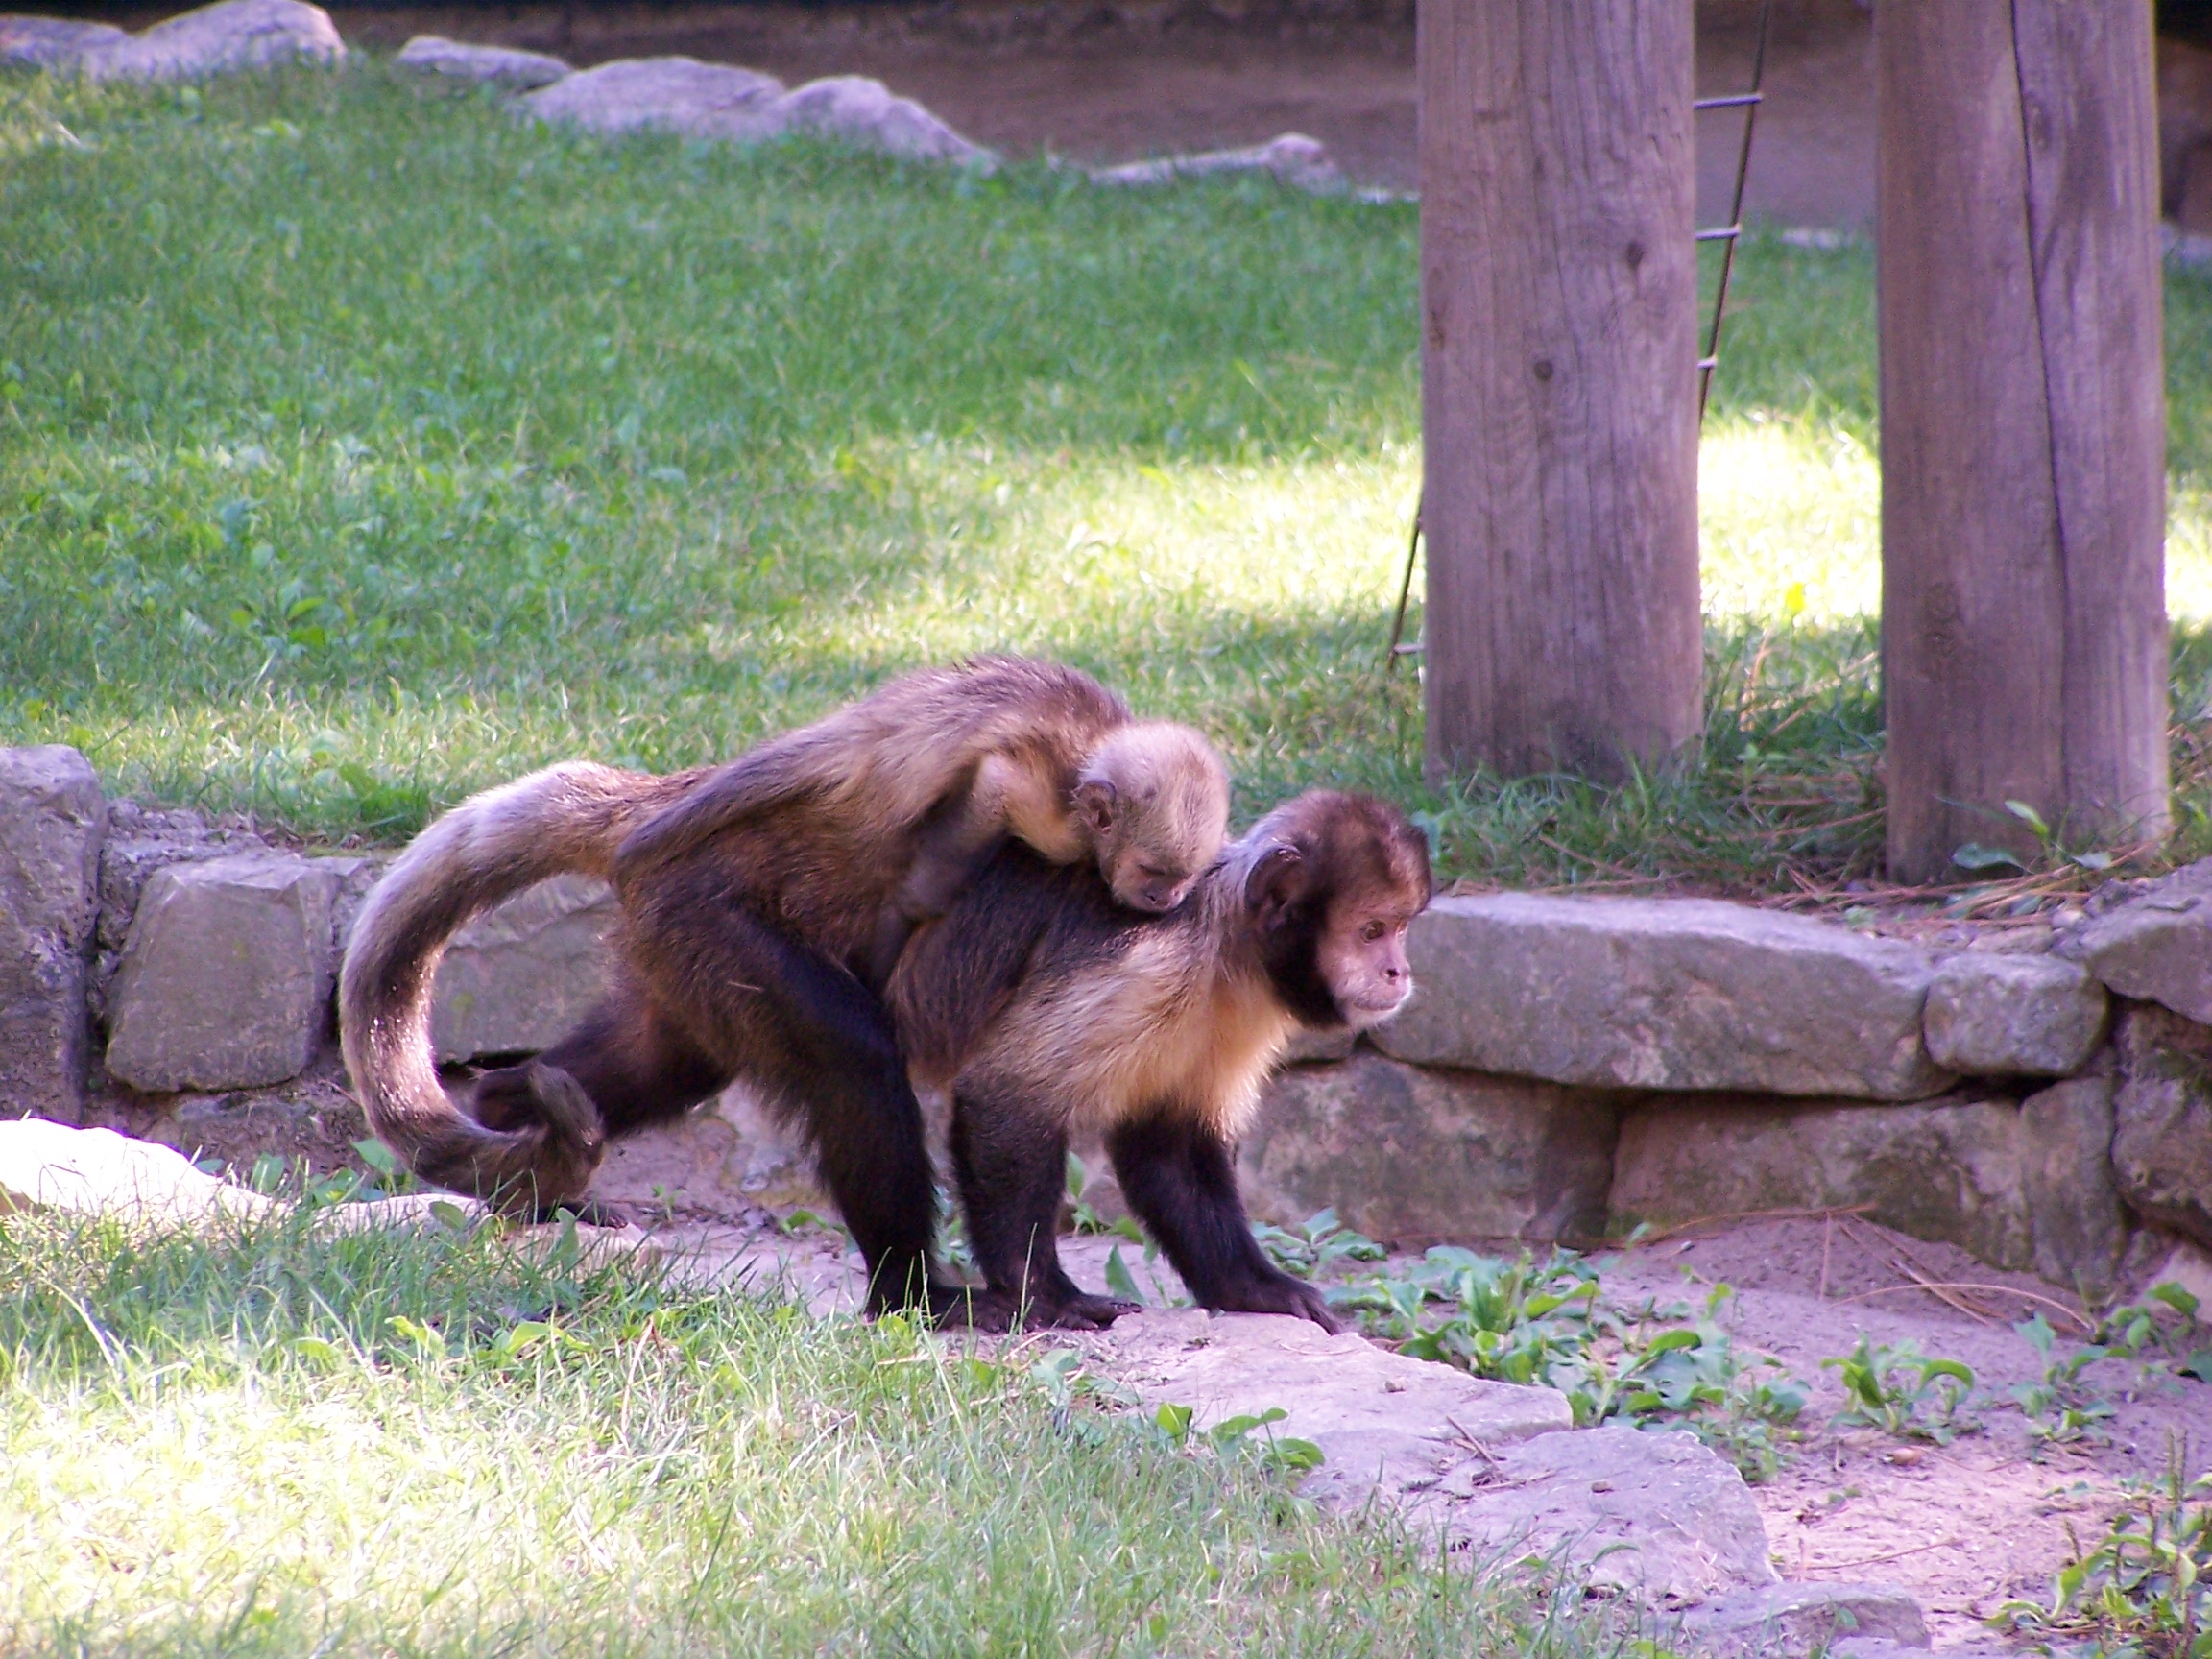 Tufted Capuchin (Cebus apella) - Wiki(fr); Image ONLY